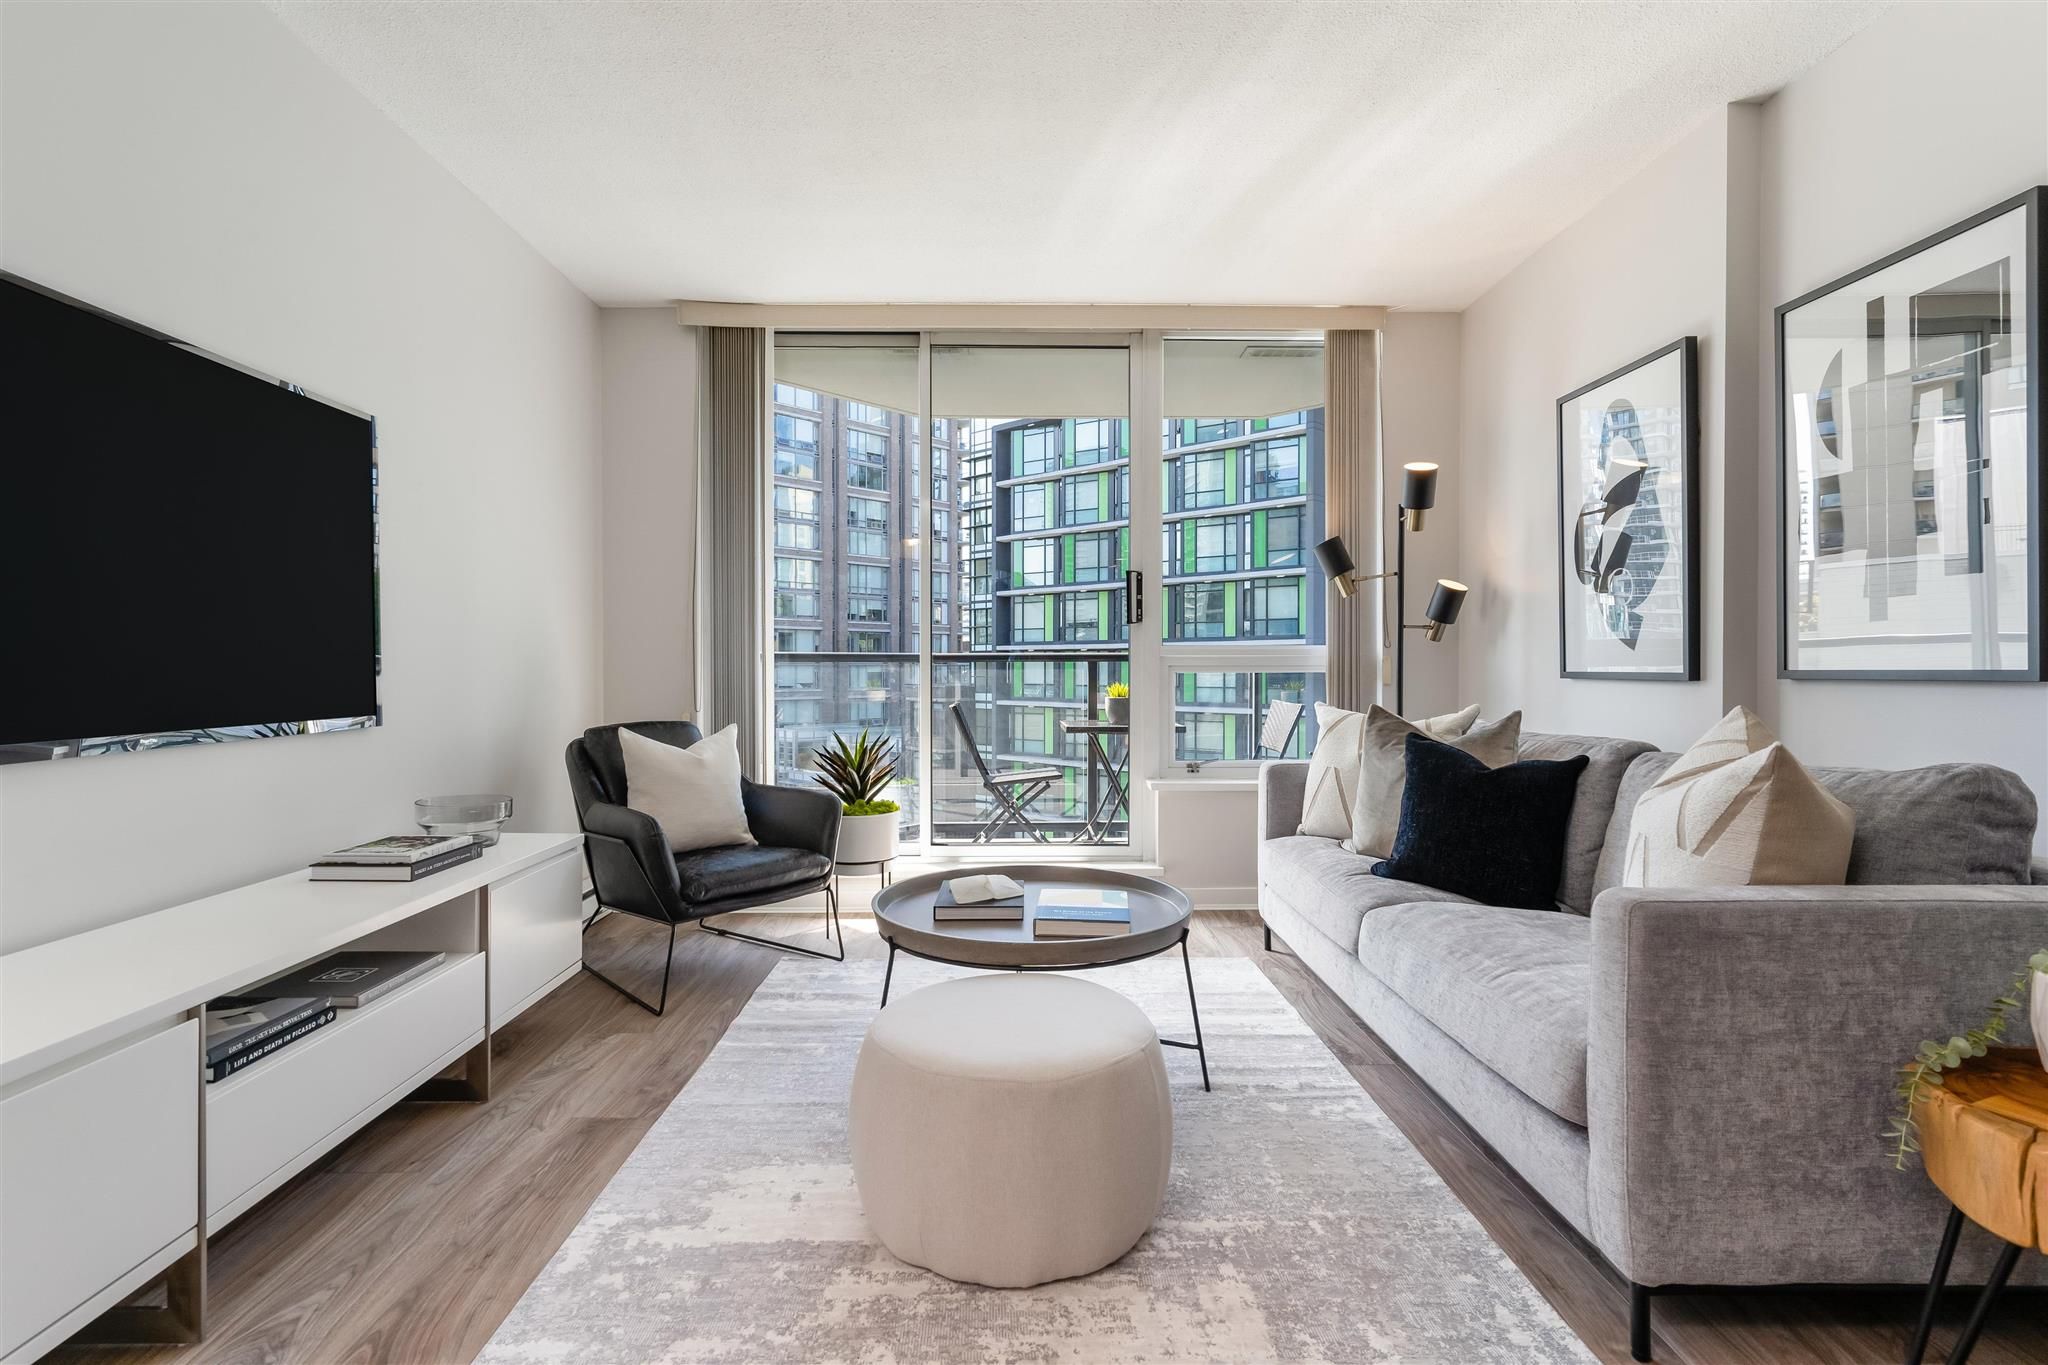 Main Photo: 907 1212 HOWE STREET in Vancouver: Downtown VW Condo for sale (Vancouver West)  : MLS®# R2606200